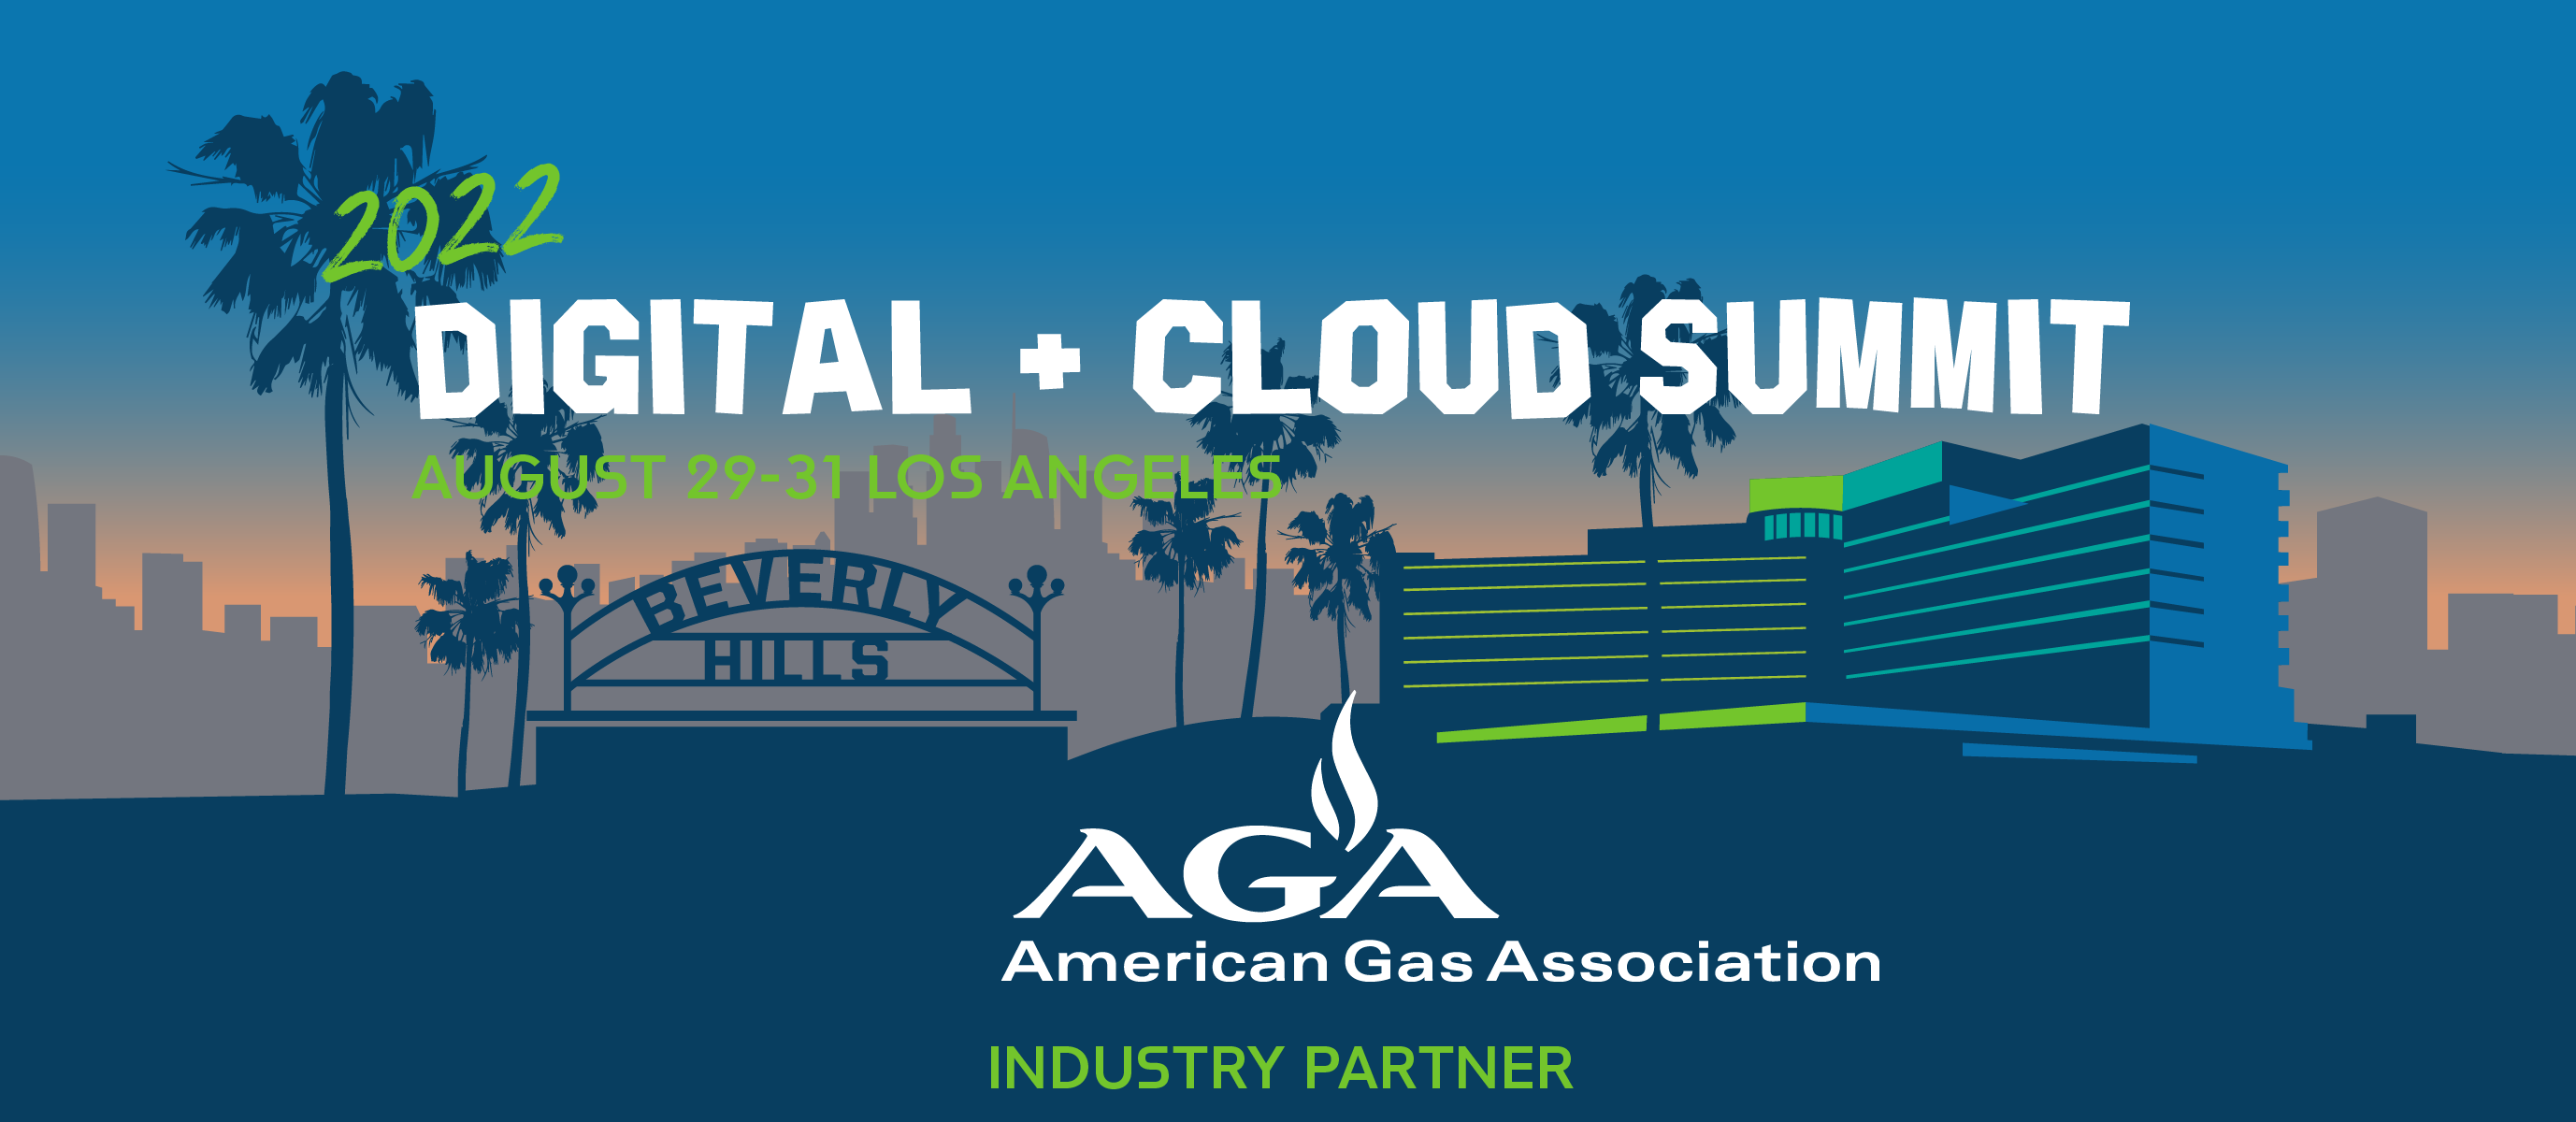 Cloud for Utilities and the American Gas Association announce new